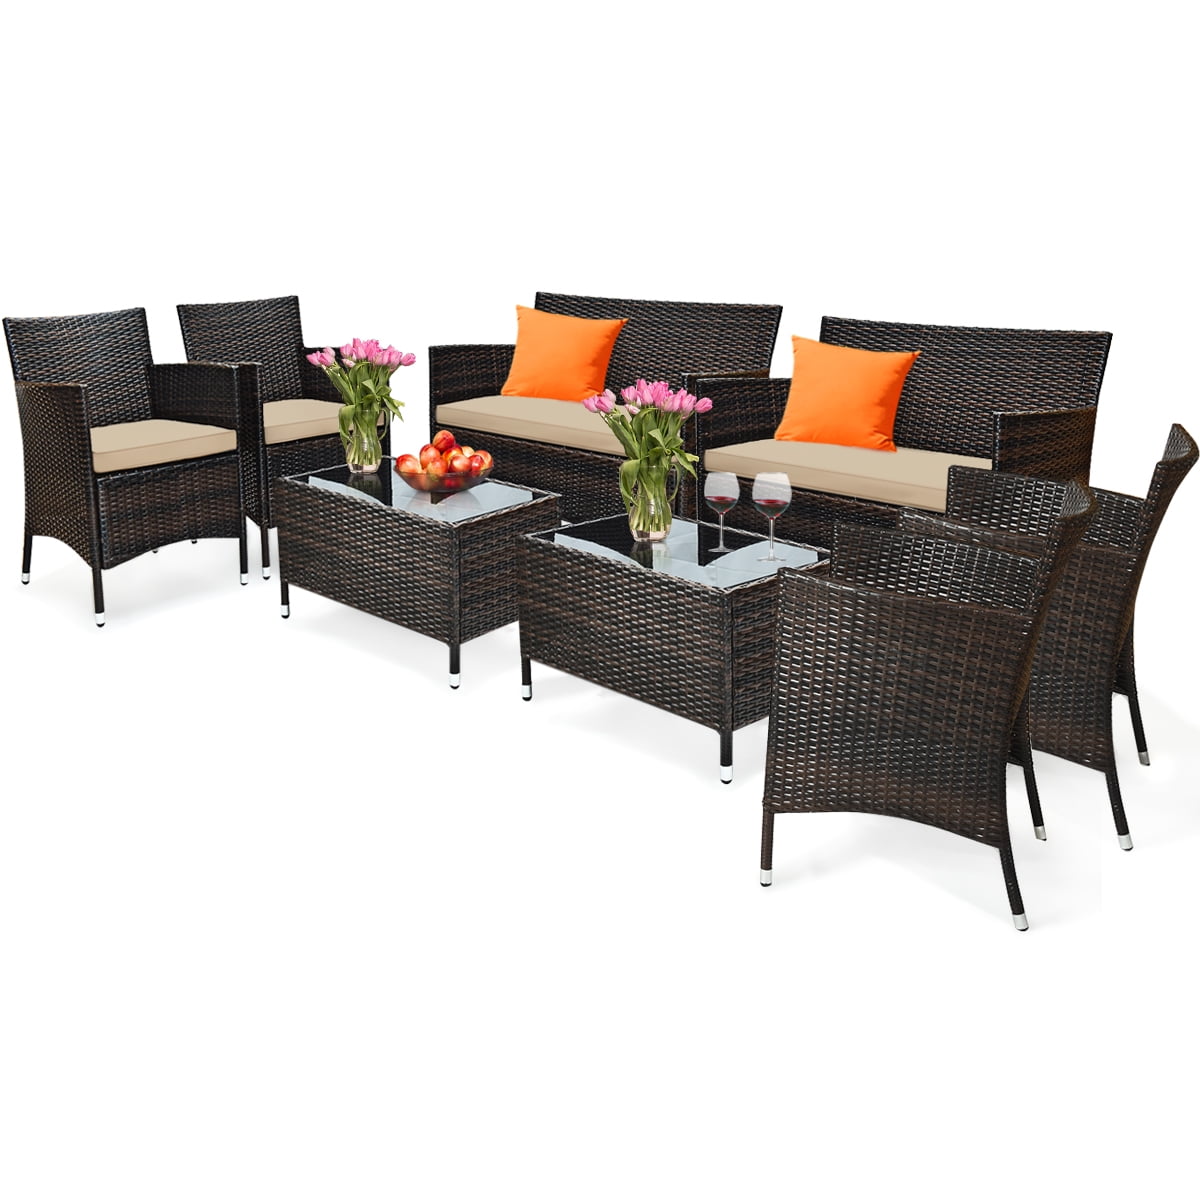 DORTALA 4-Piece Patio Wicker Conversation Furniture Set Wicker Chairs with Soft Cushion and Table with Tempered Glass Bistro Sets with Coffee Table for Courtyard Balcony Garden Outdoor Rattan Sofas with Tempered Glass Coffee Table Black